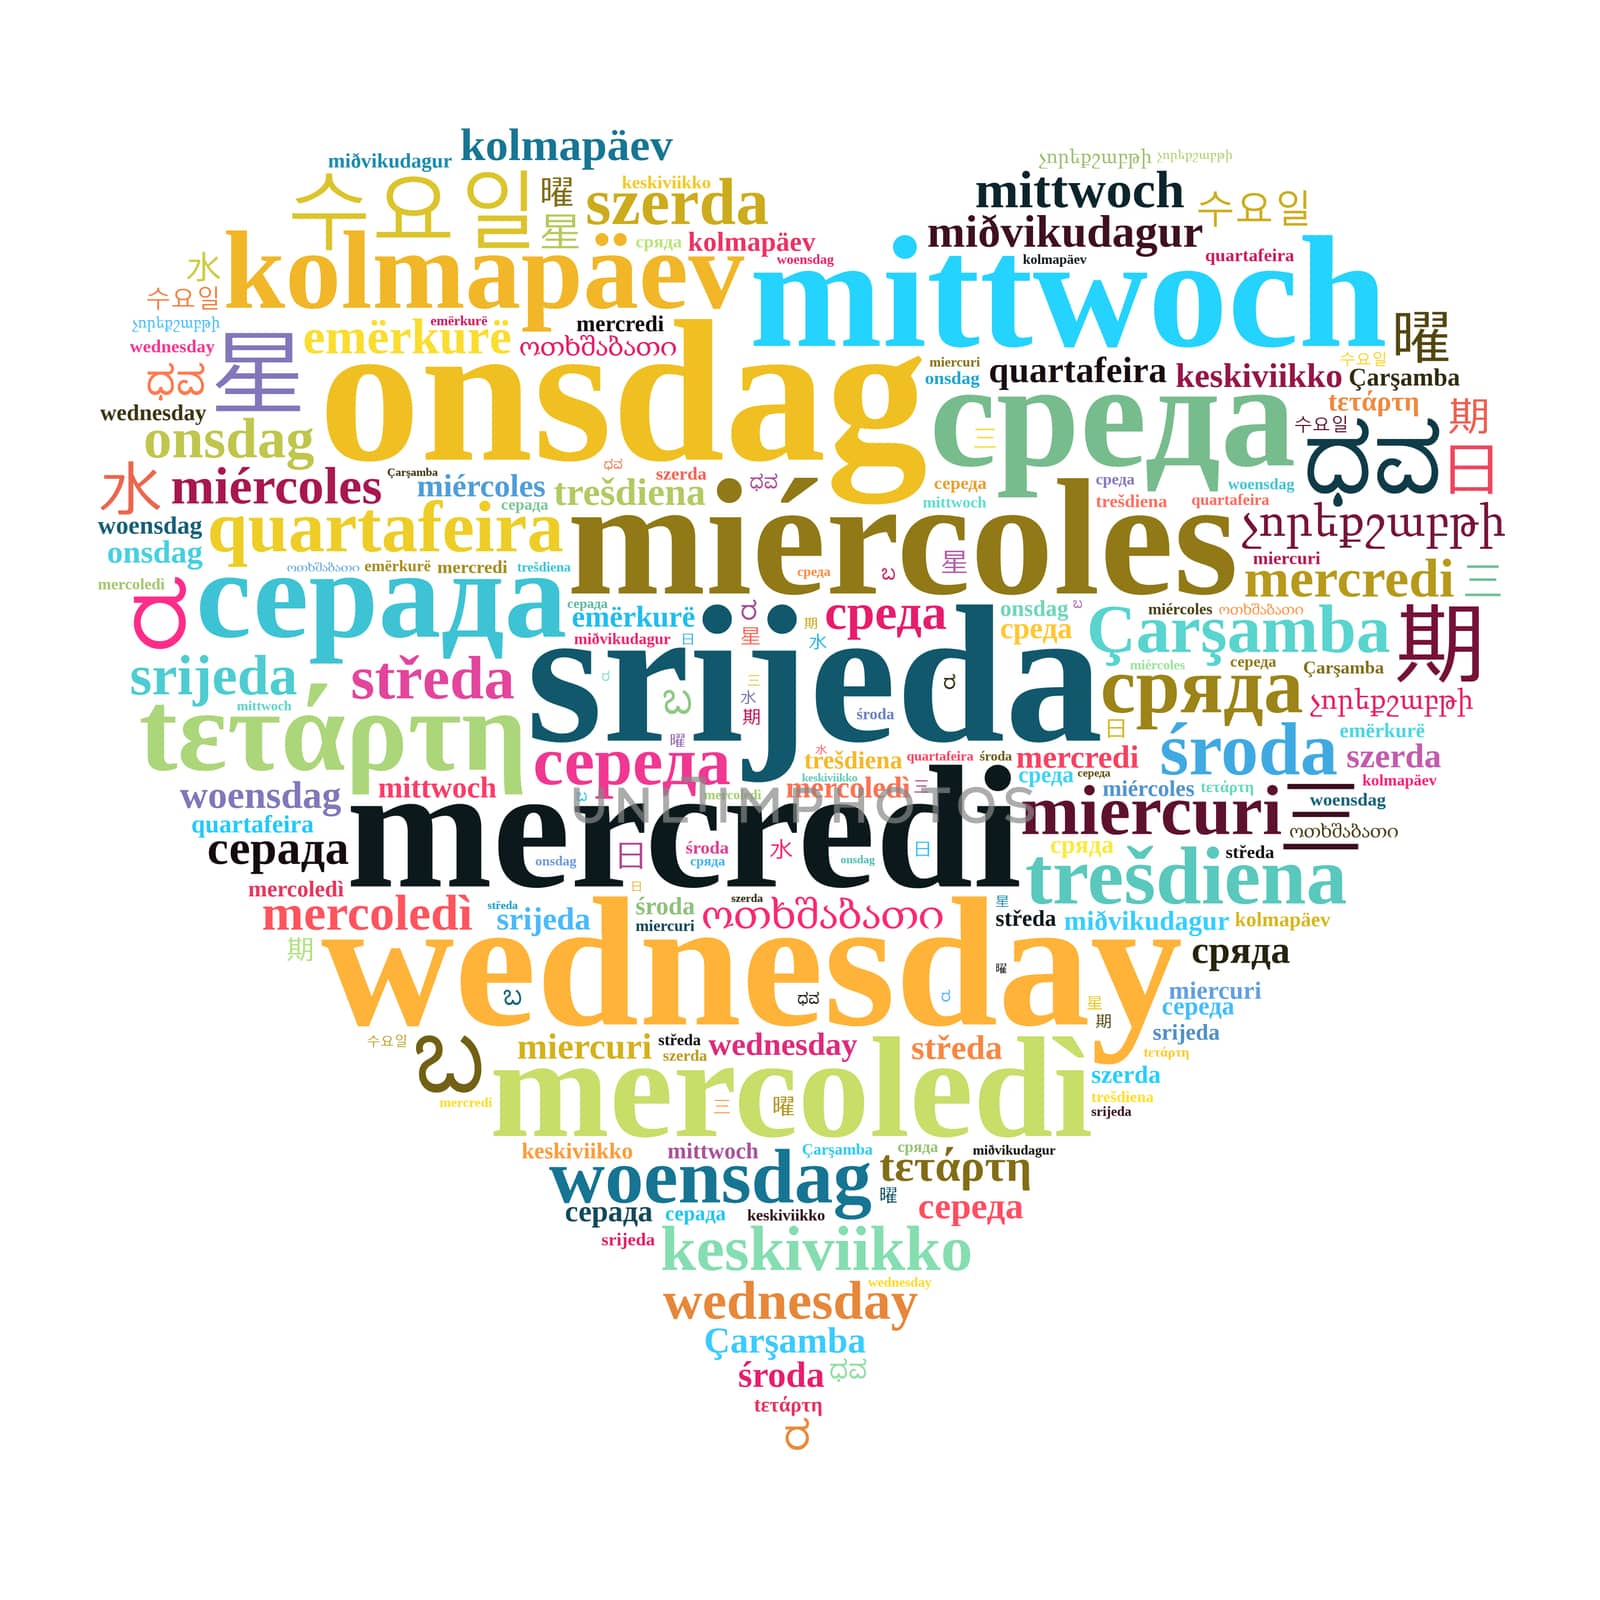 Word Wednesday in different languages word cloud concept